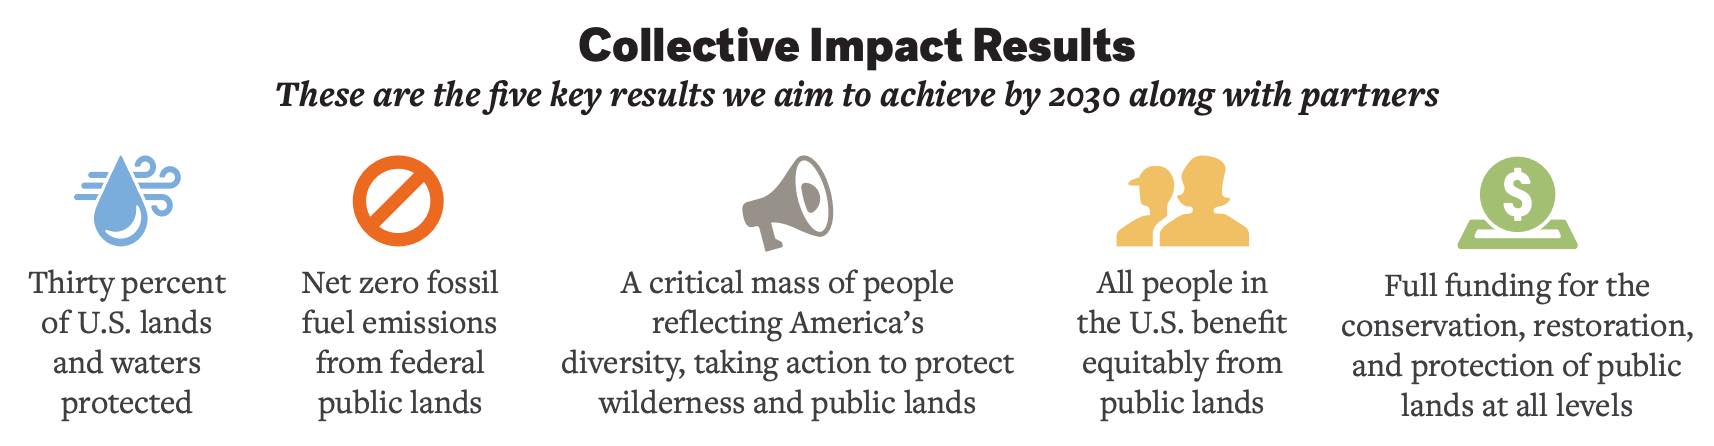 2030 Collective Impact Results